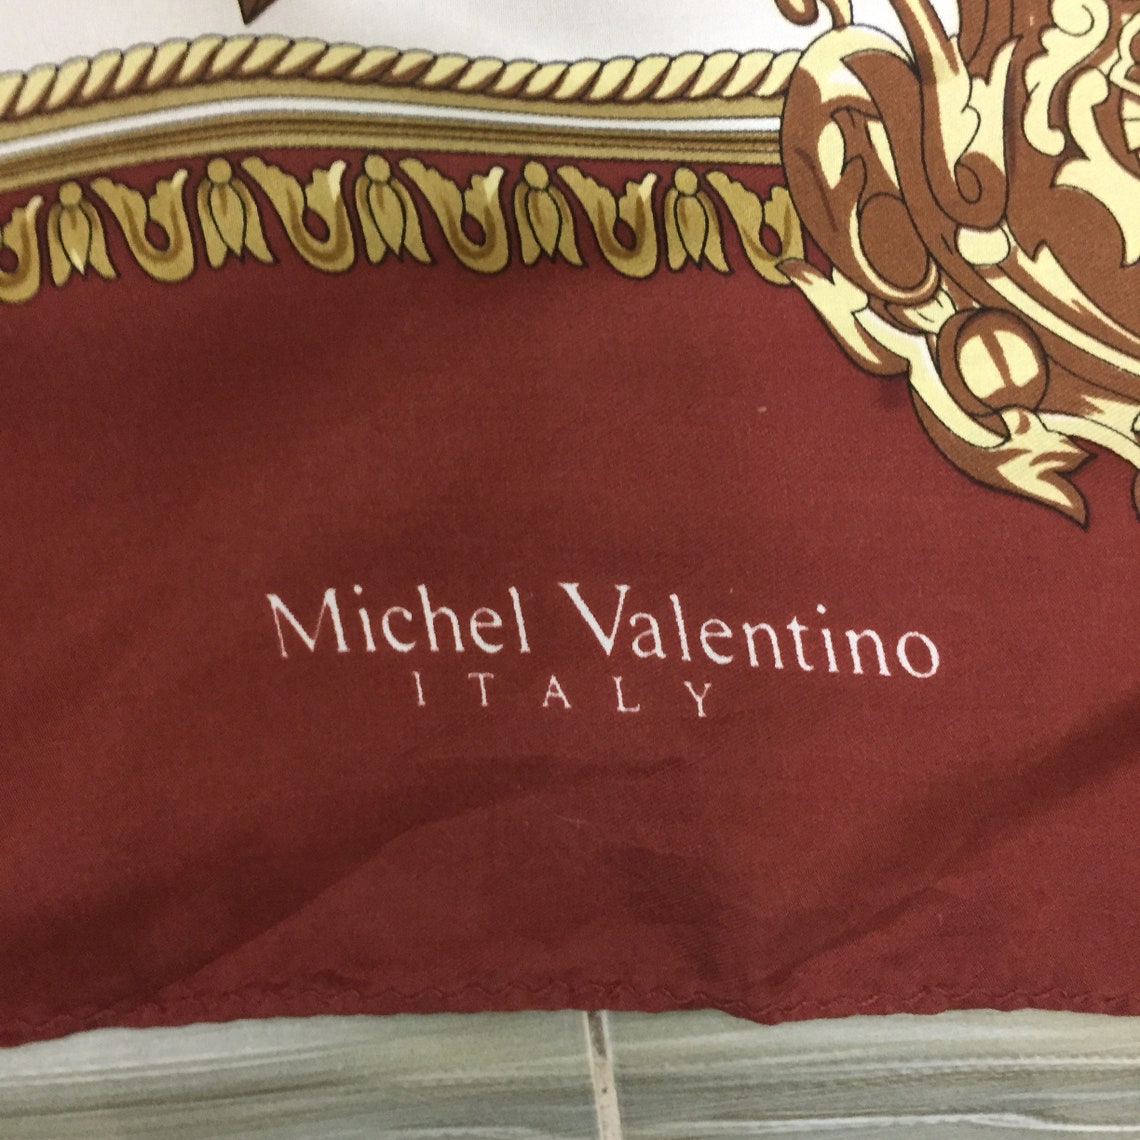 Michel valentino italy silk scarf vintage scarves gift for her | Etsy